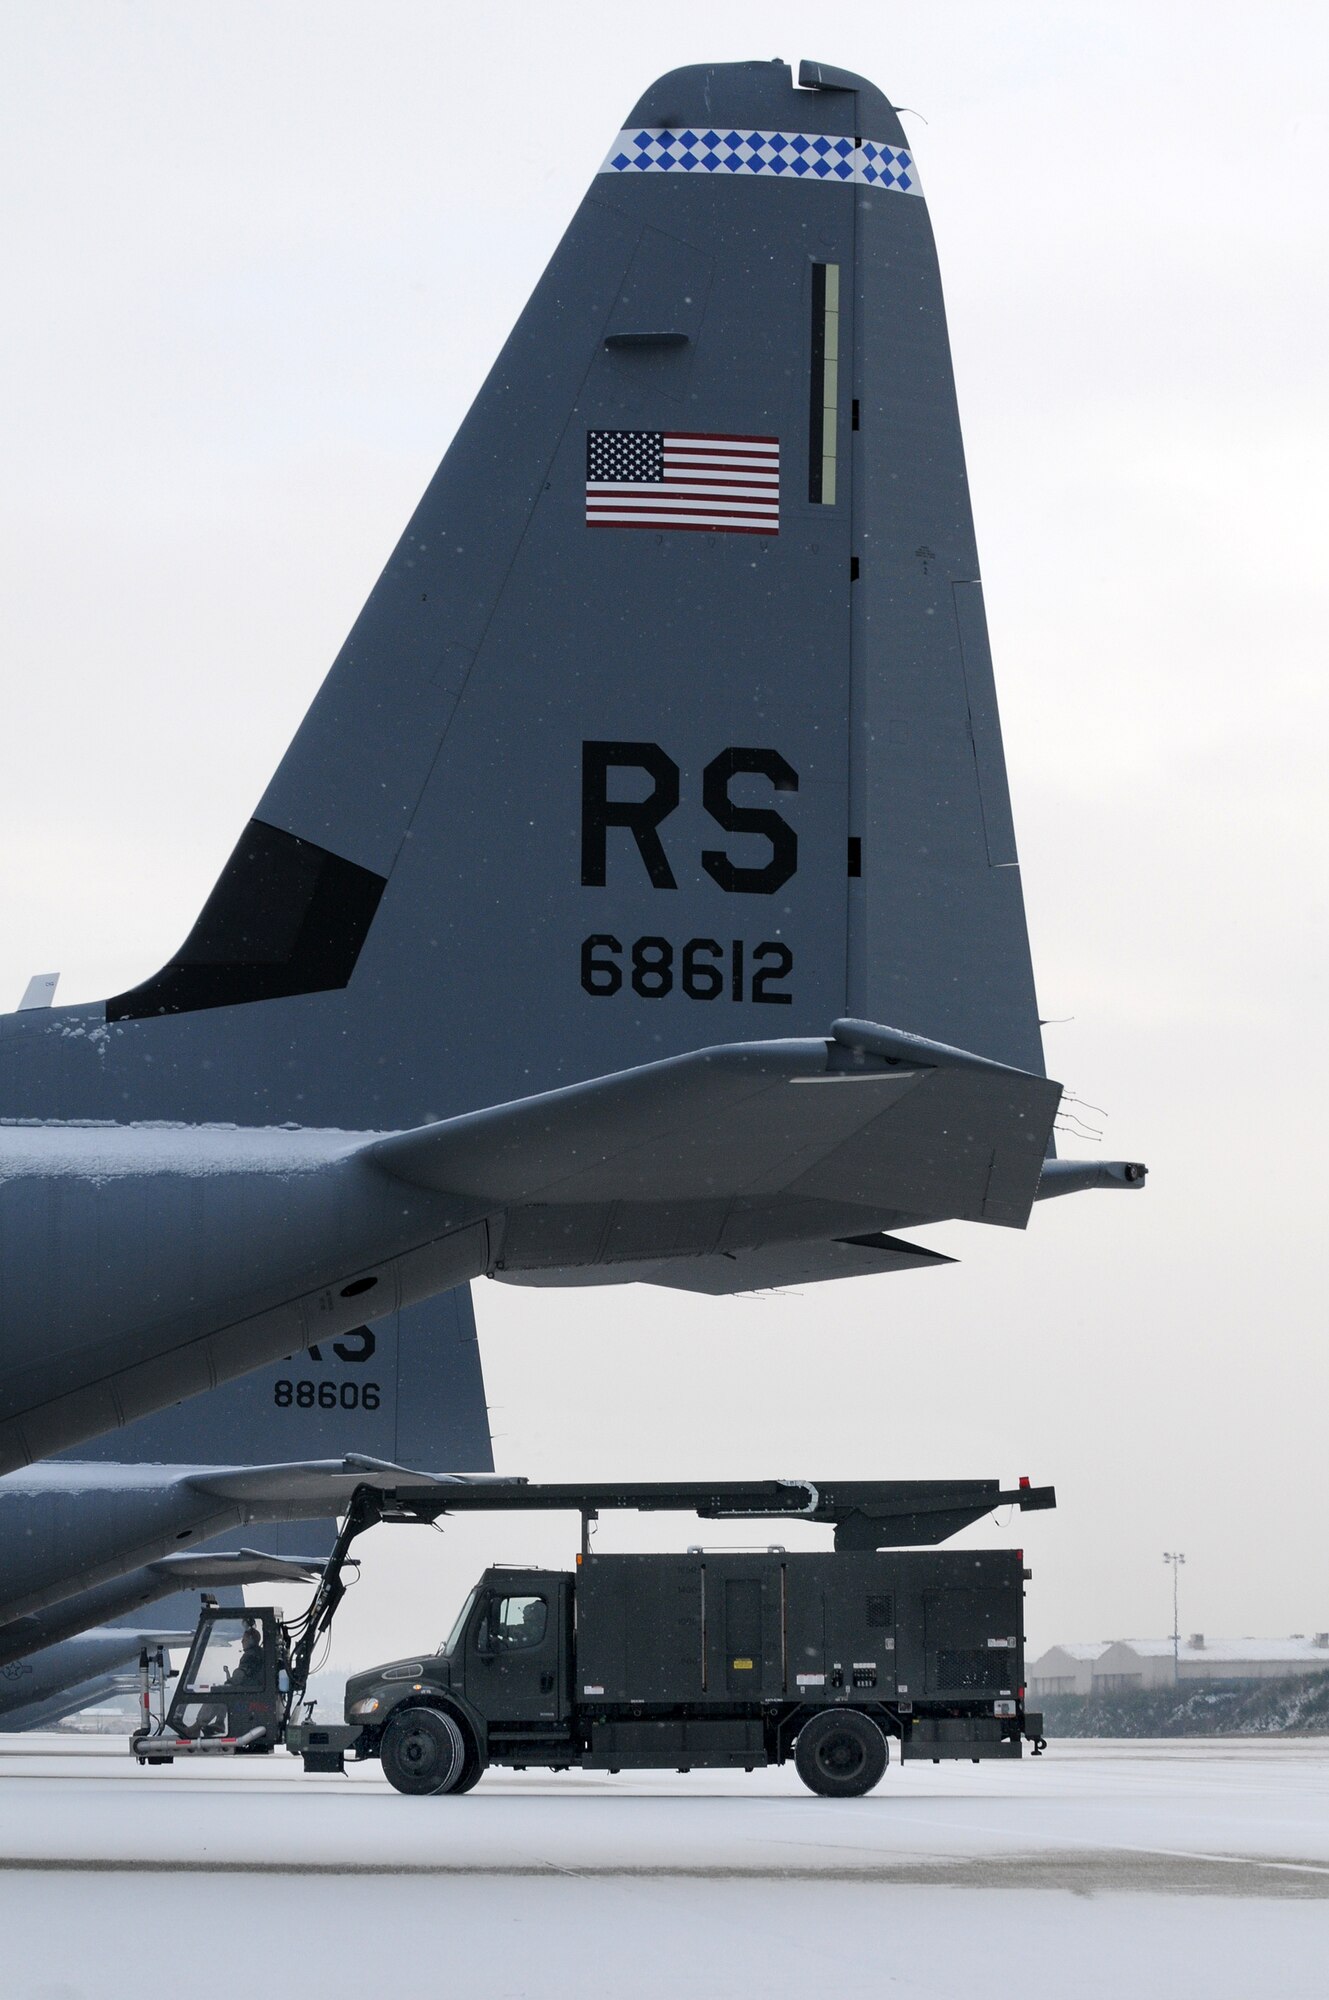 U.S. Air Force personnel from the 86th Aircraft Maintenance Squadron prepare to de-ice a C-130J at Ramstein Air Base, Germany, January 7, 2010. Aircraft deicing is a process in which liquid solutions are sprayed onto an aircraft to defrost ice and prevent future precipitation from freezing. (U.S. Air Force photo by Airman 1st Class Brea Miller)